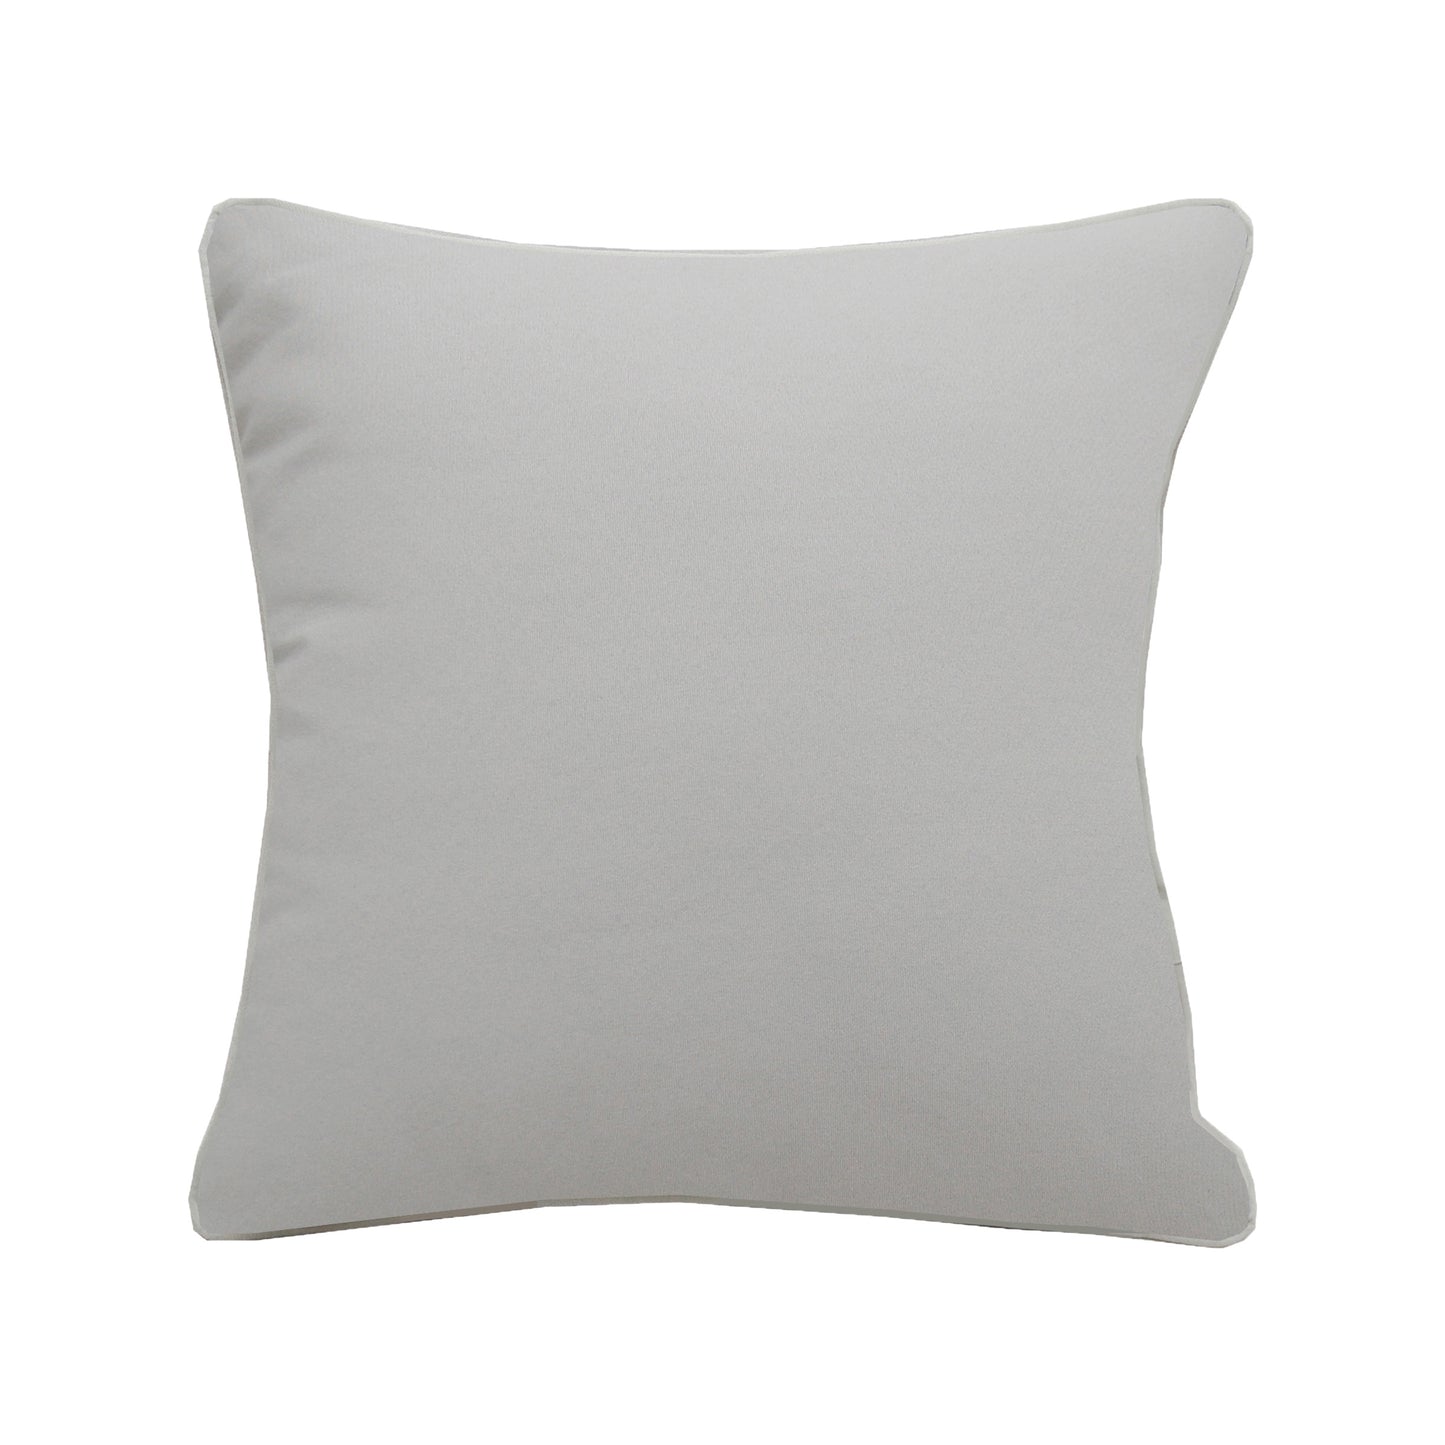 Solid grey fabric; back of the Iris and Bee pillow.